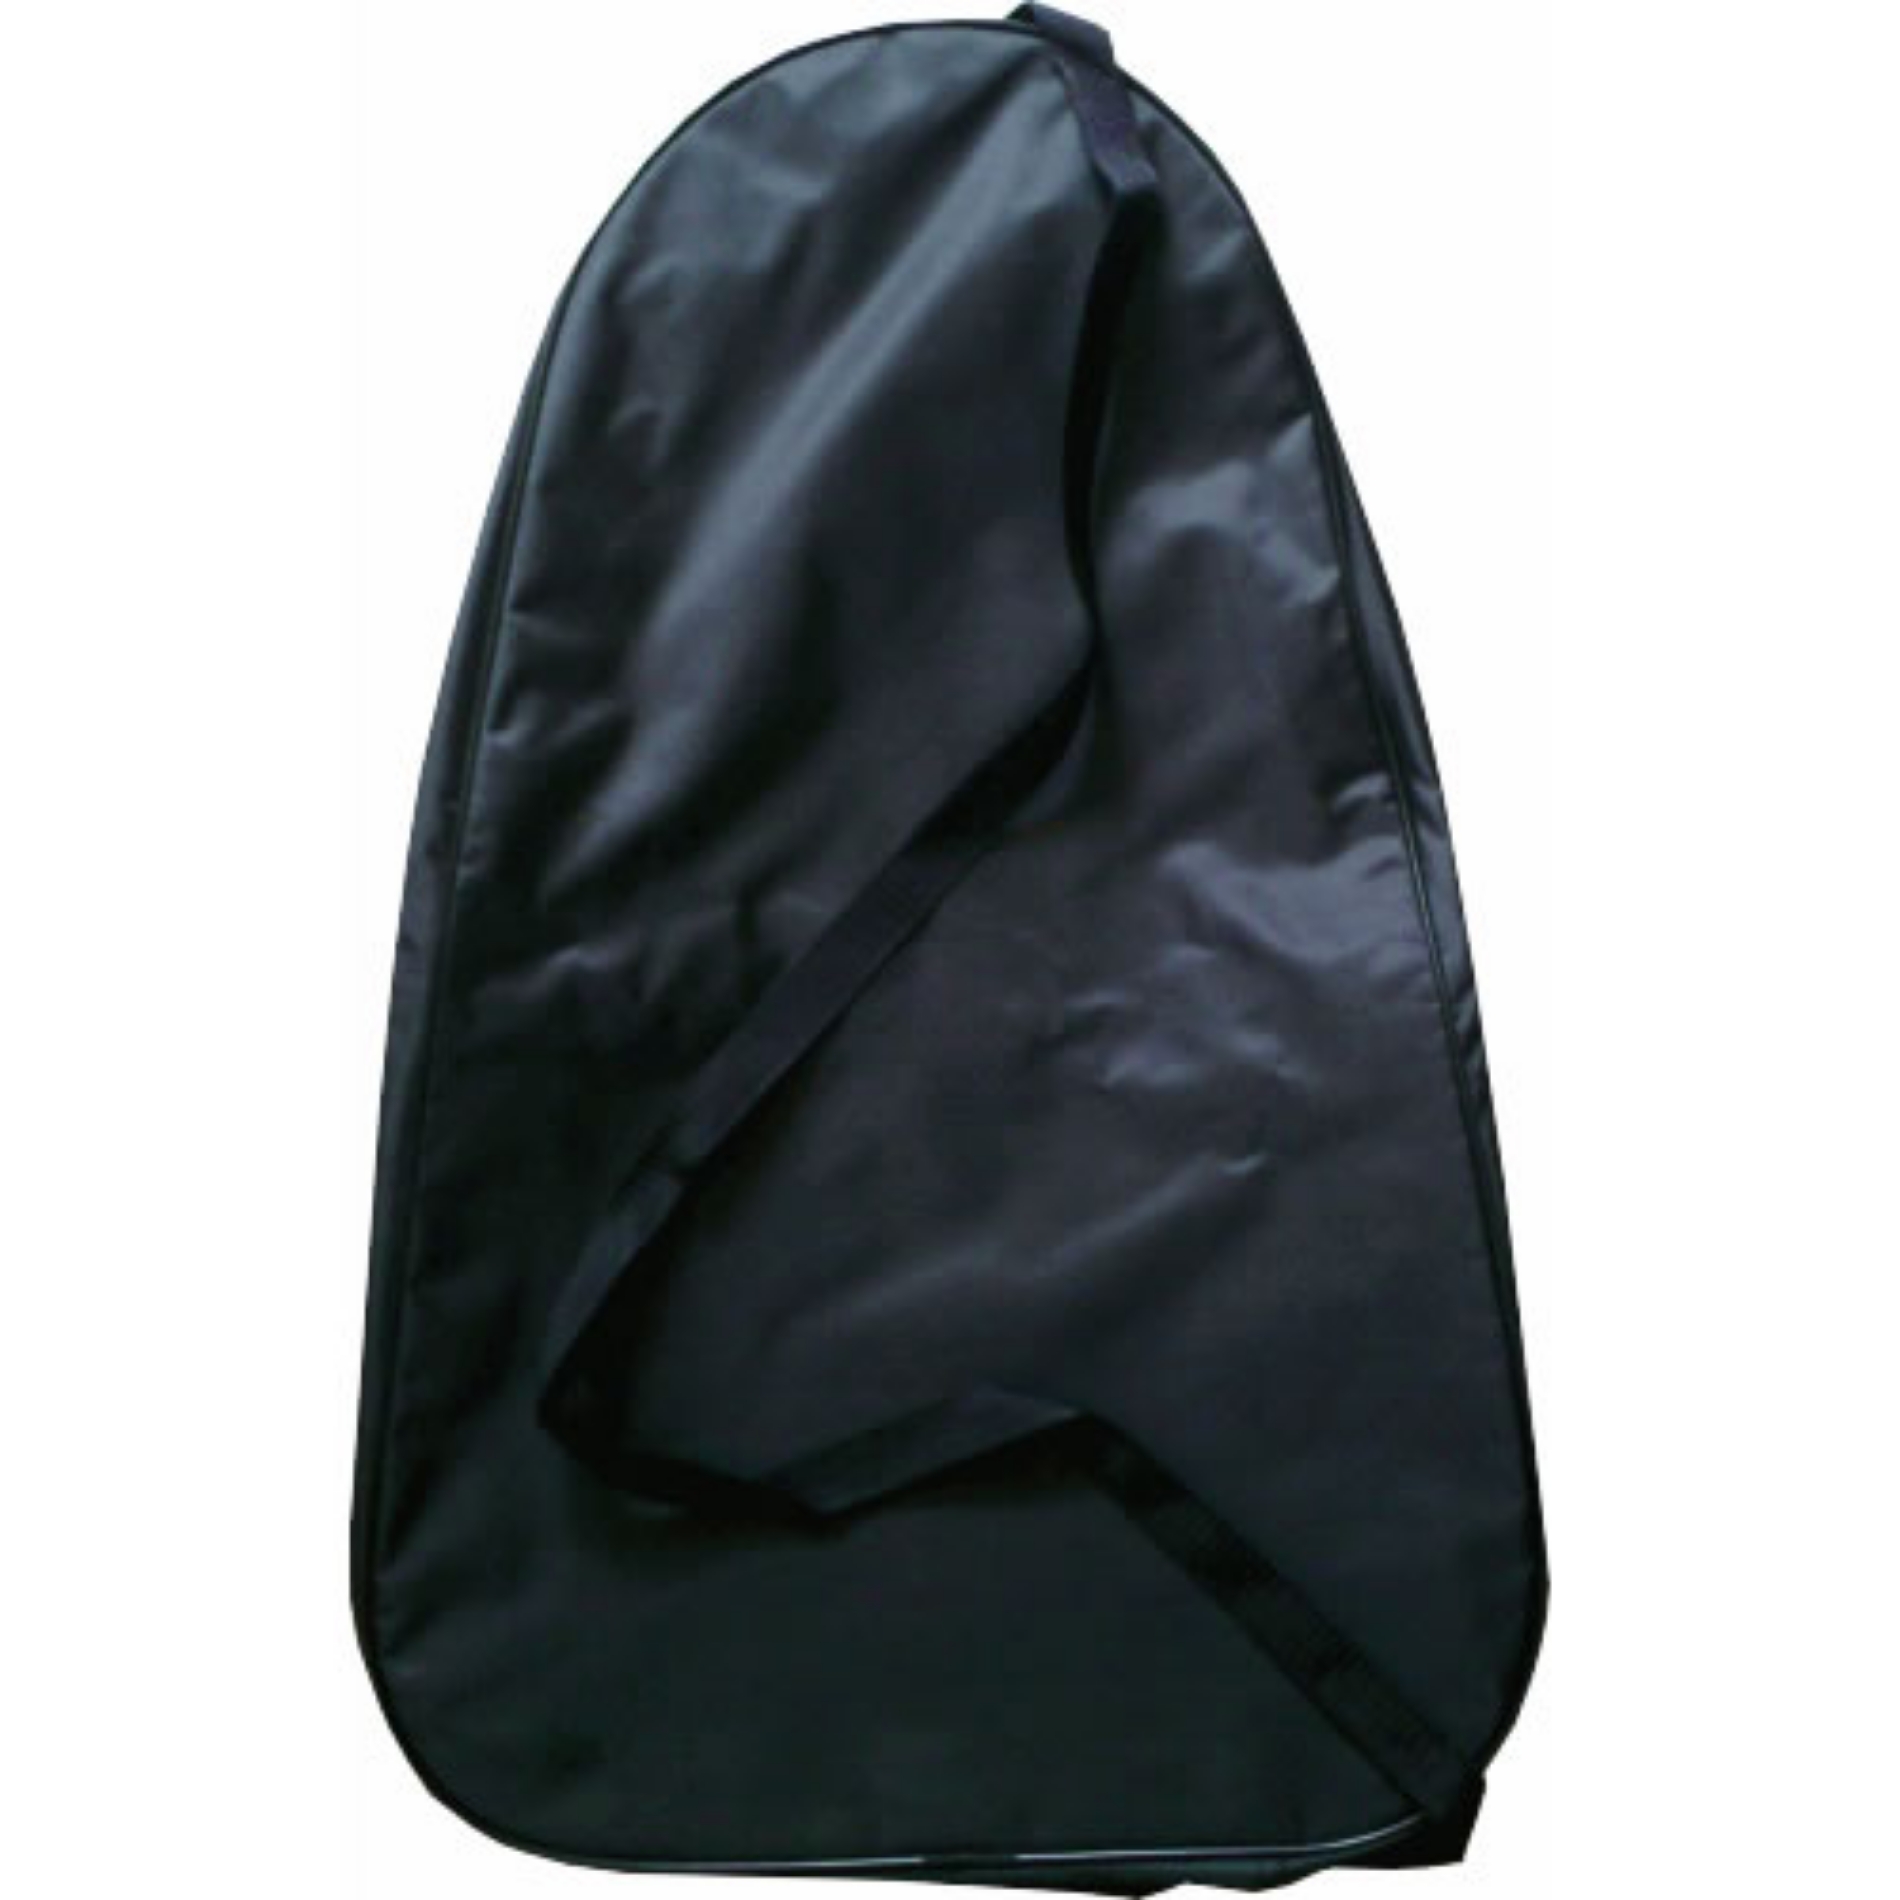 Picture of Trumeter Measuring Wheel Carry Bag